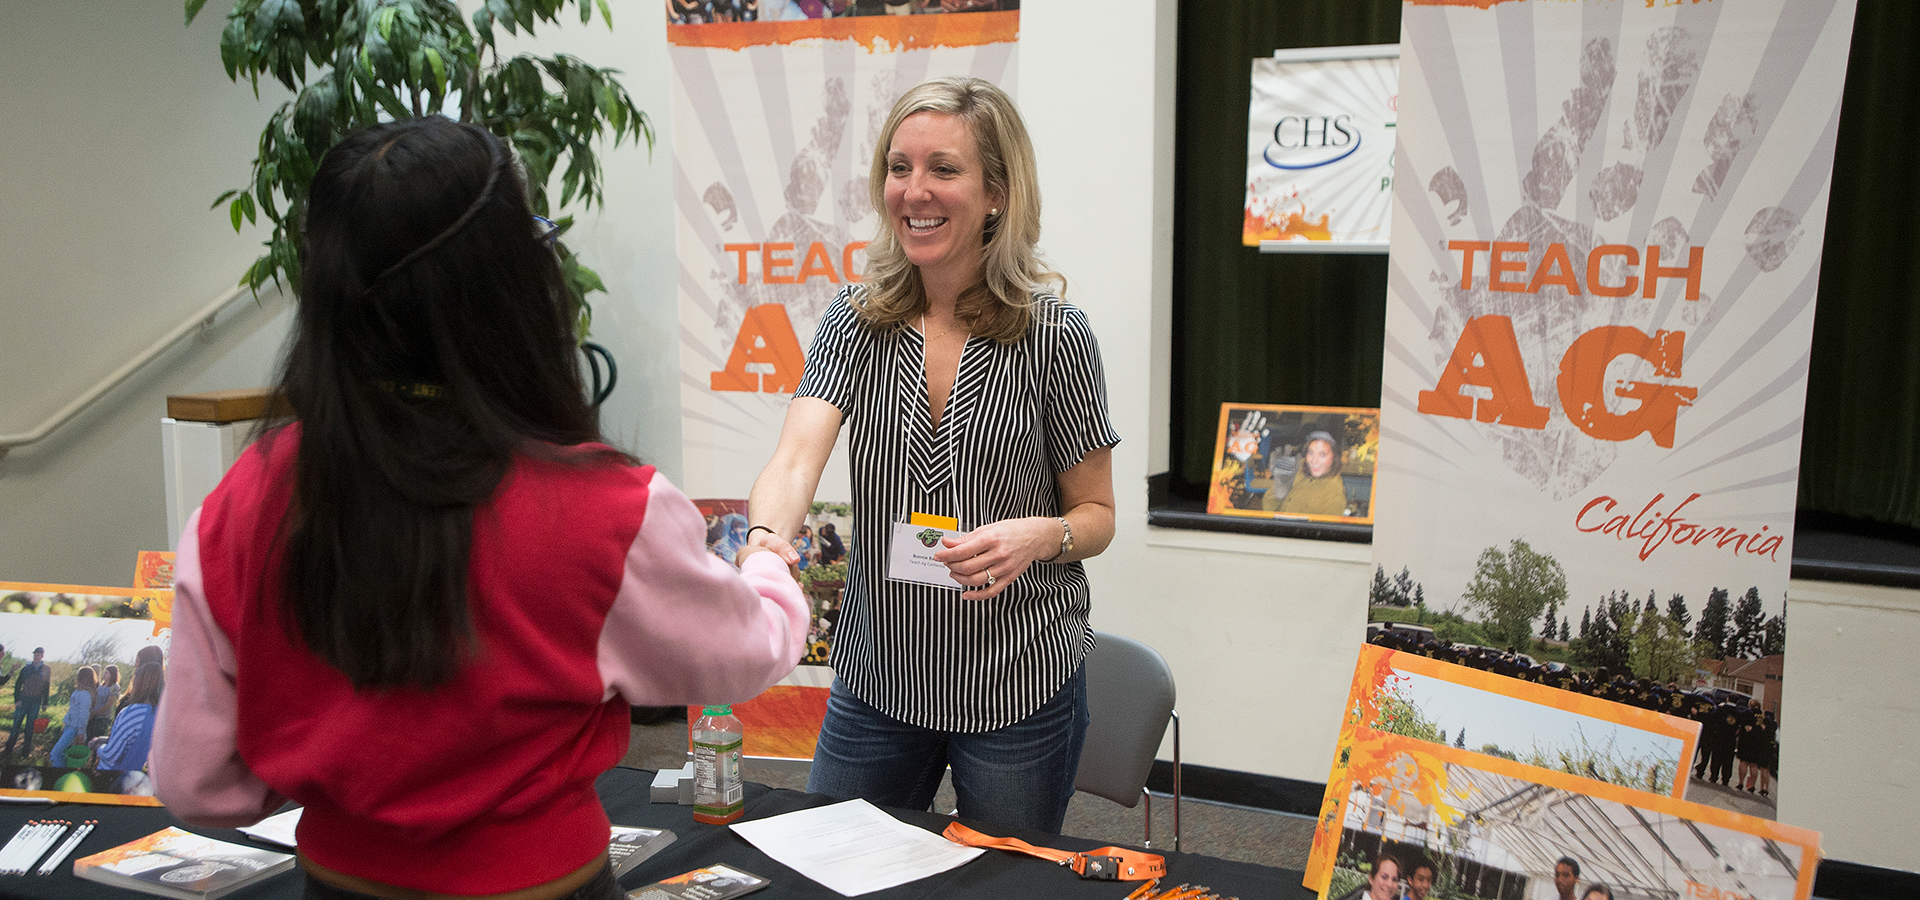 A employer representative greets a student at the 2018 Ag Career Day